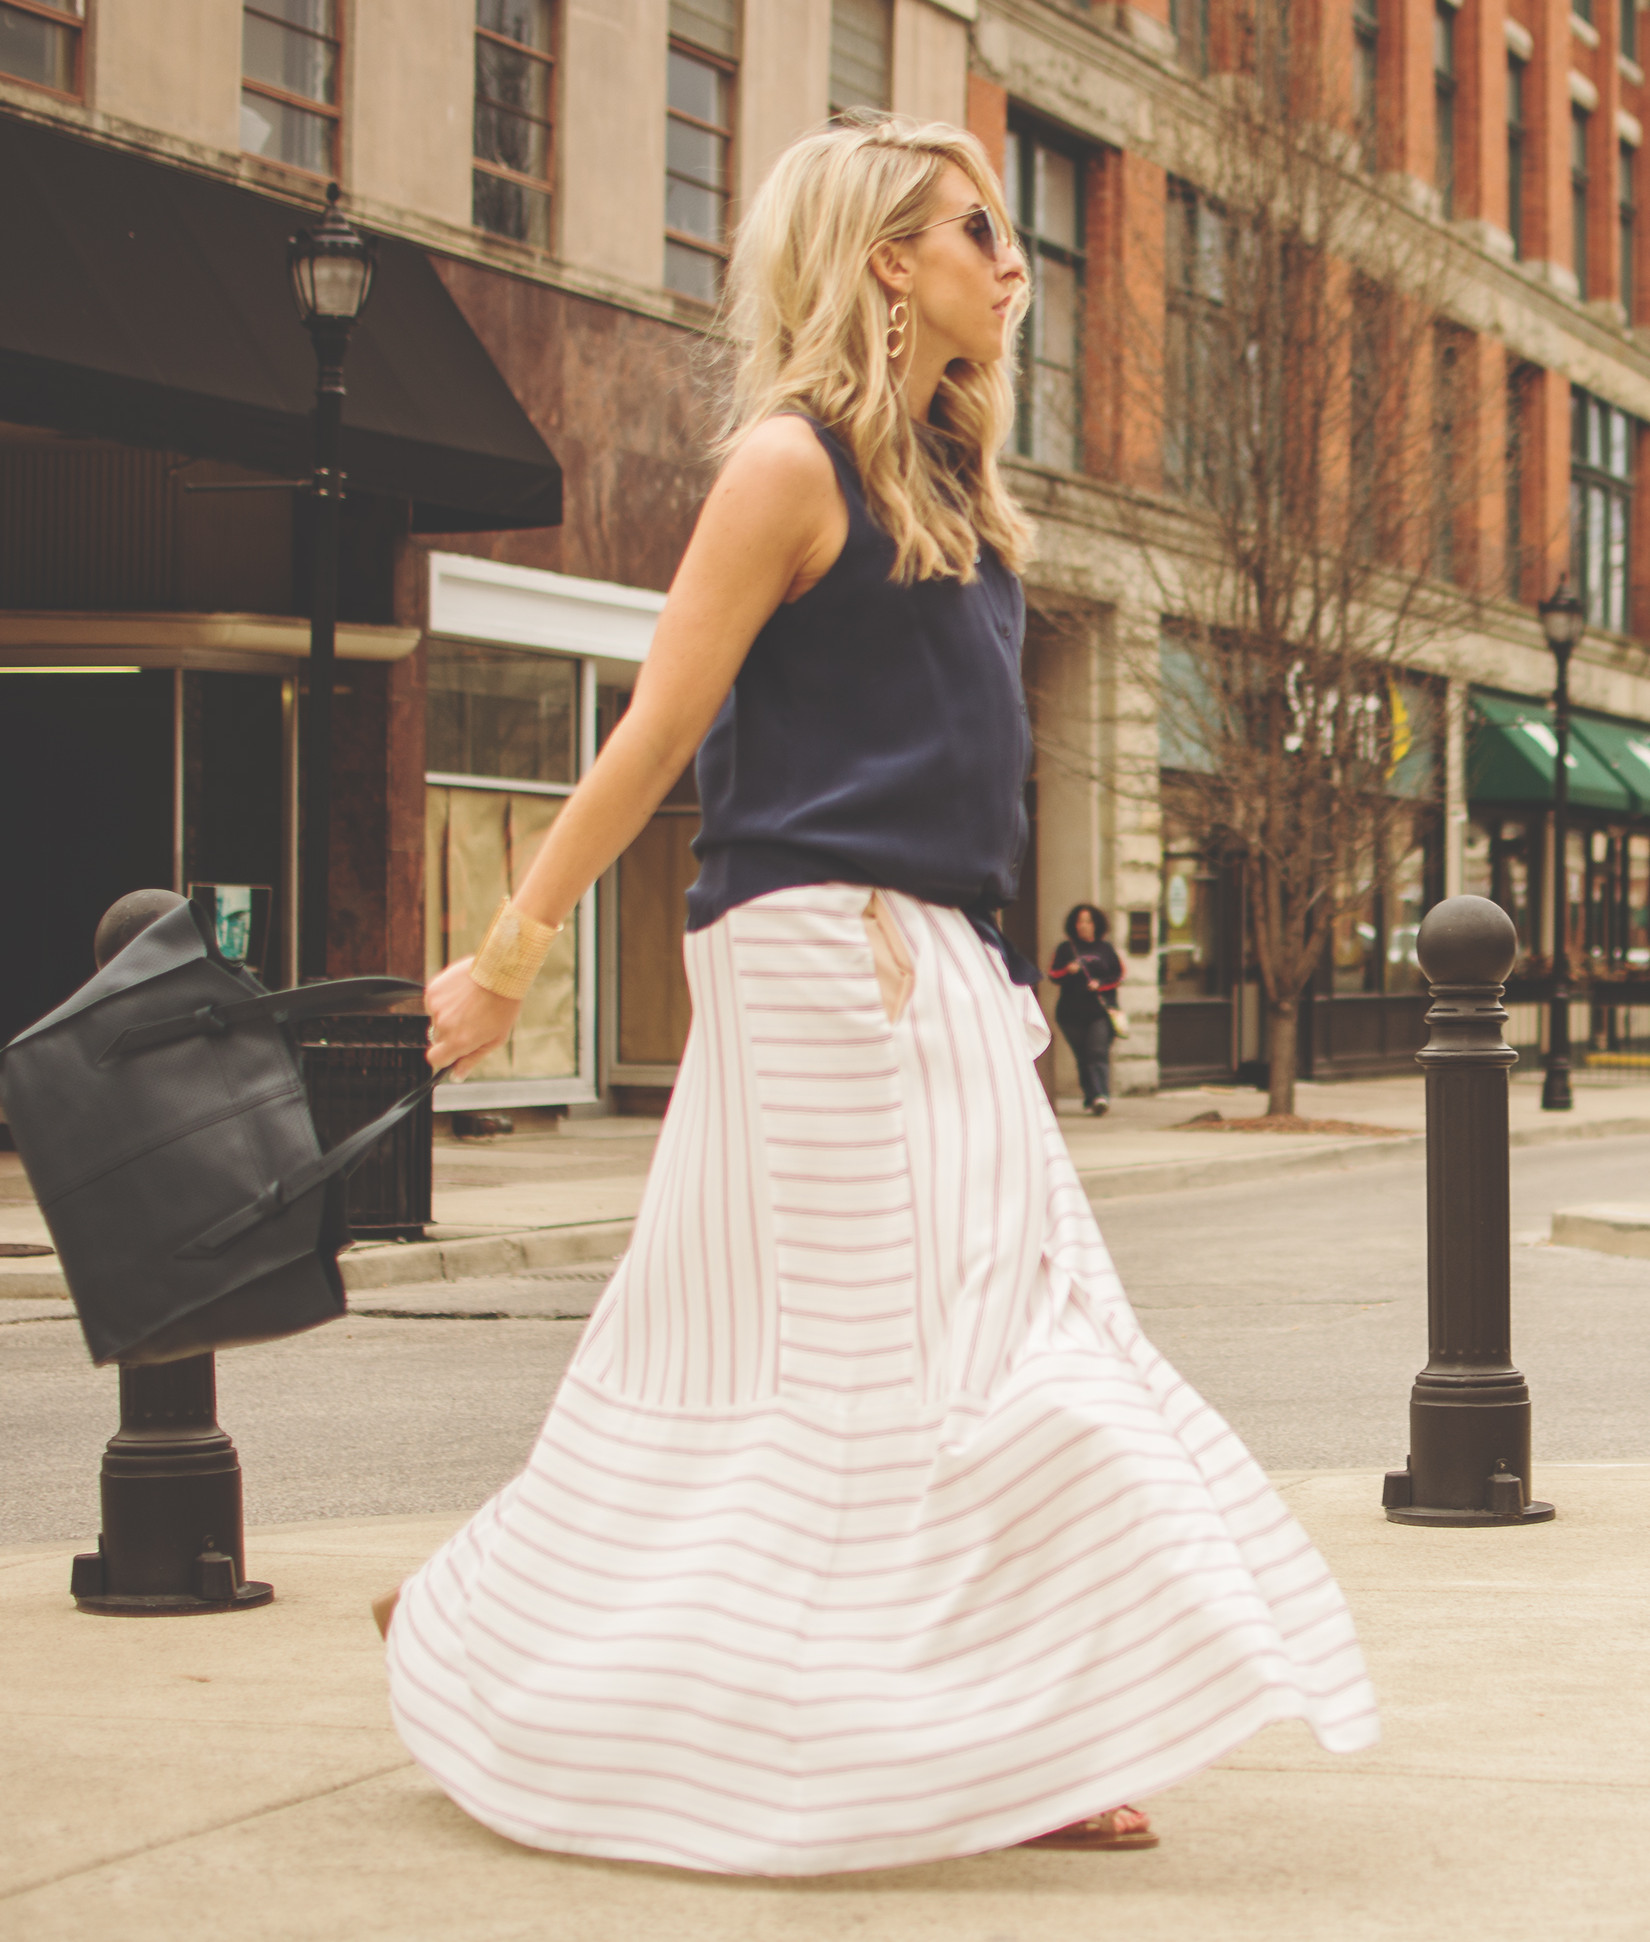 The Striped Maxi Skirt